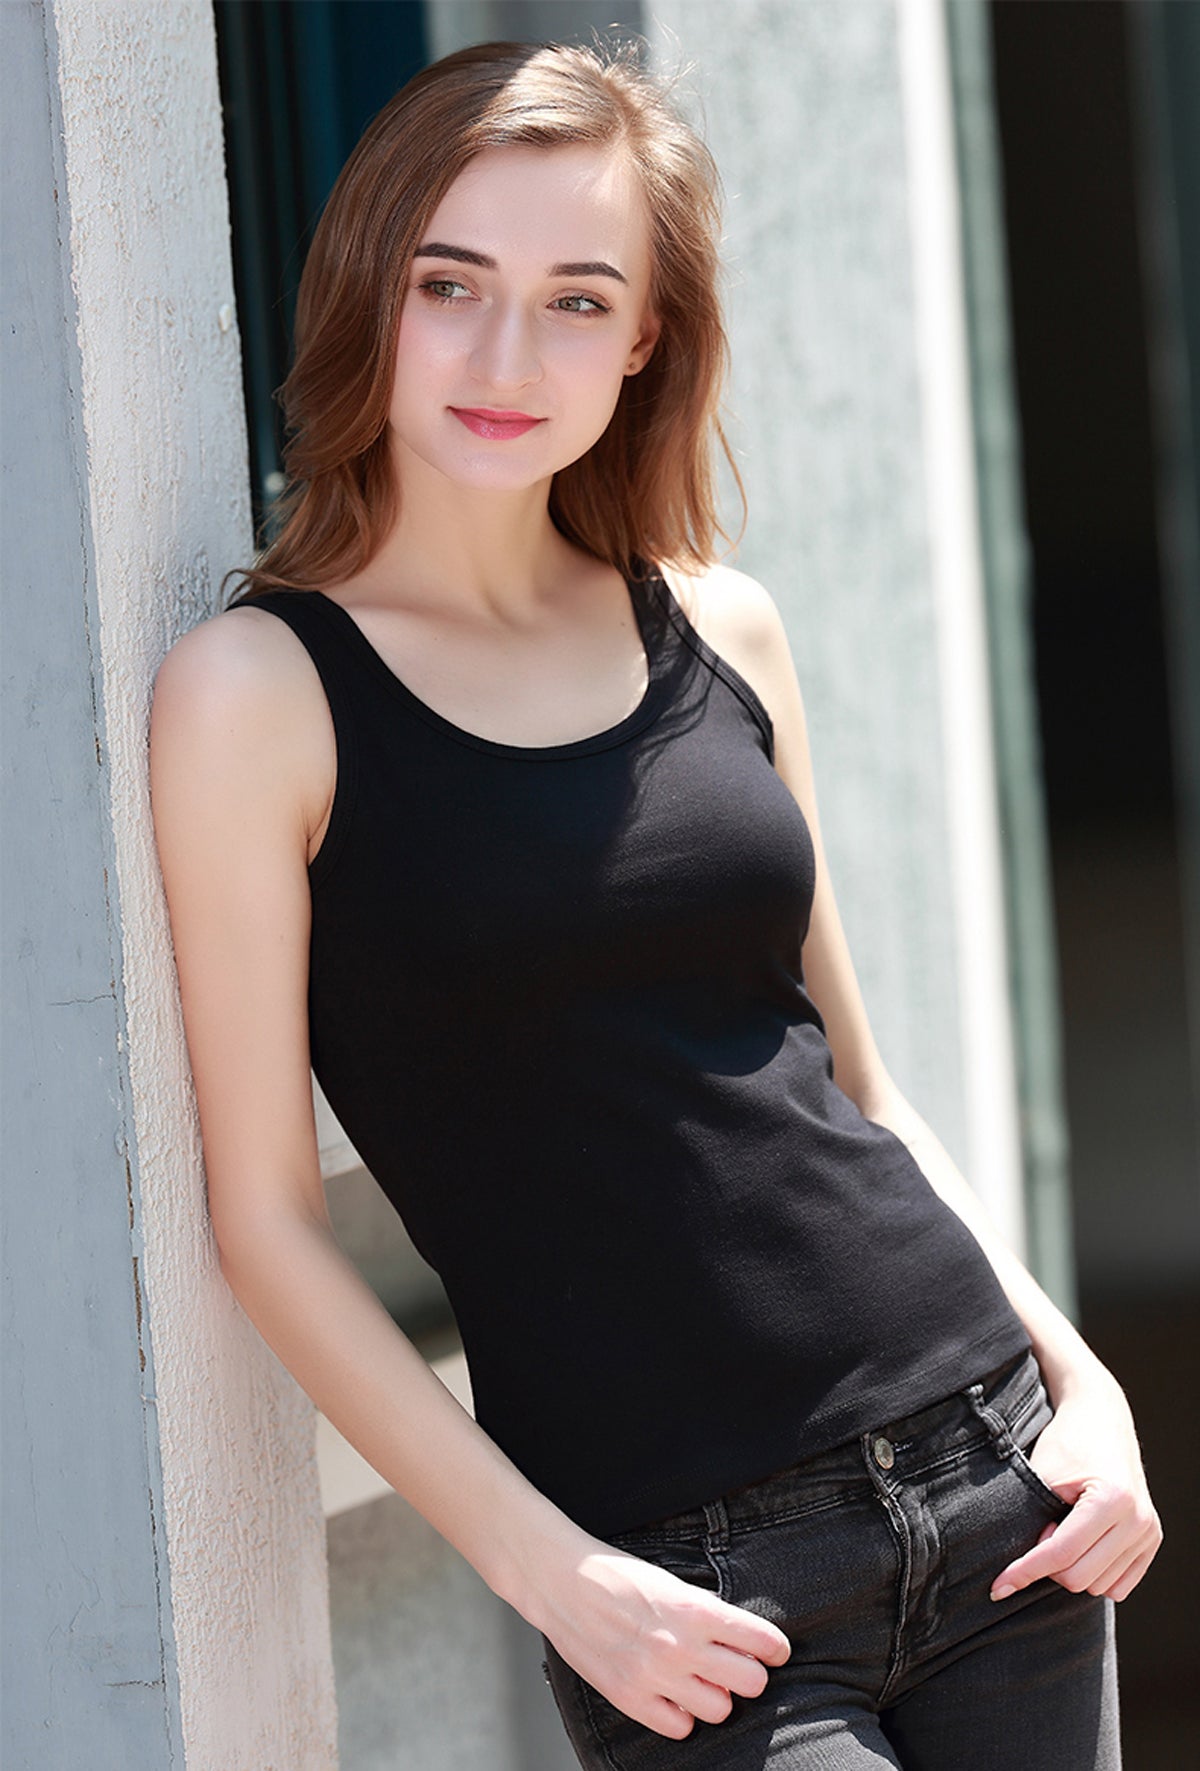 Women's Stretchy Tank Tops With Built-in Shelf Bra. Available In